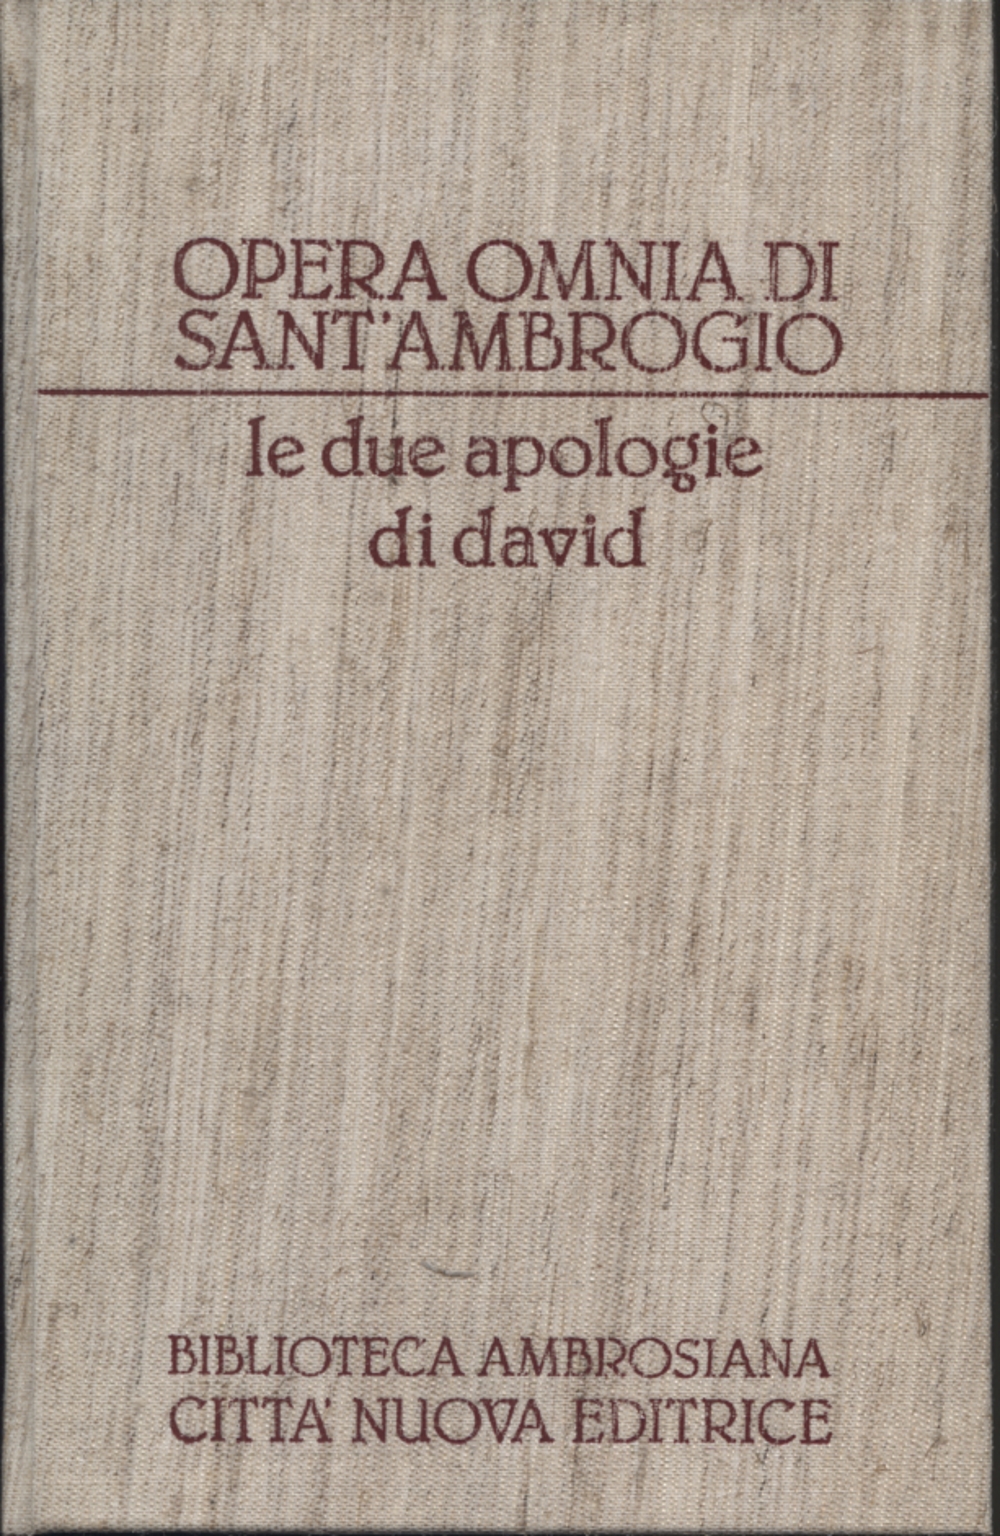 Exegetical works V: Apology of the prophet David T, Sant'ambrogio